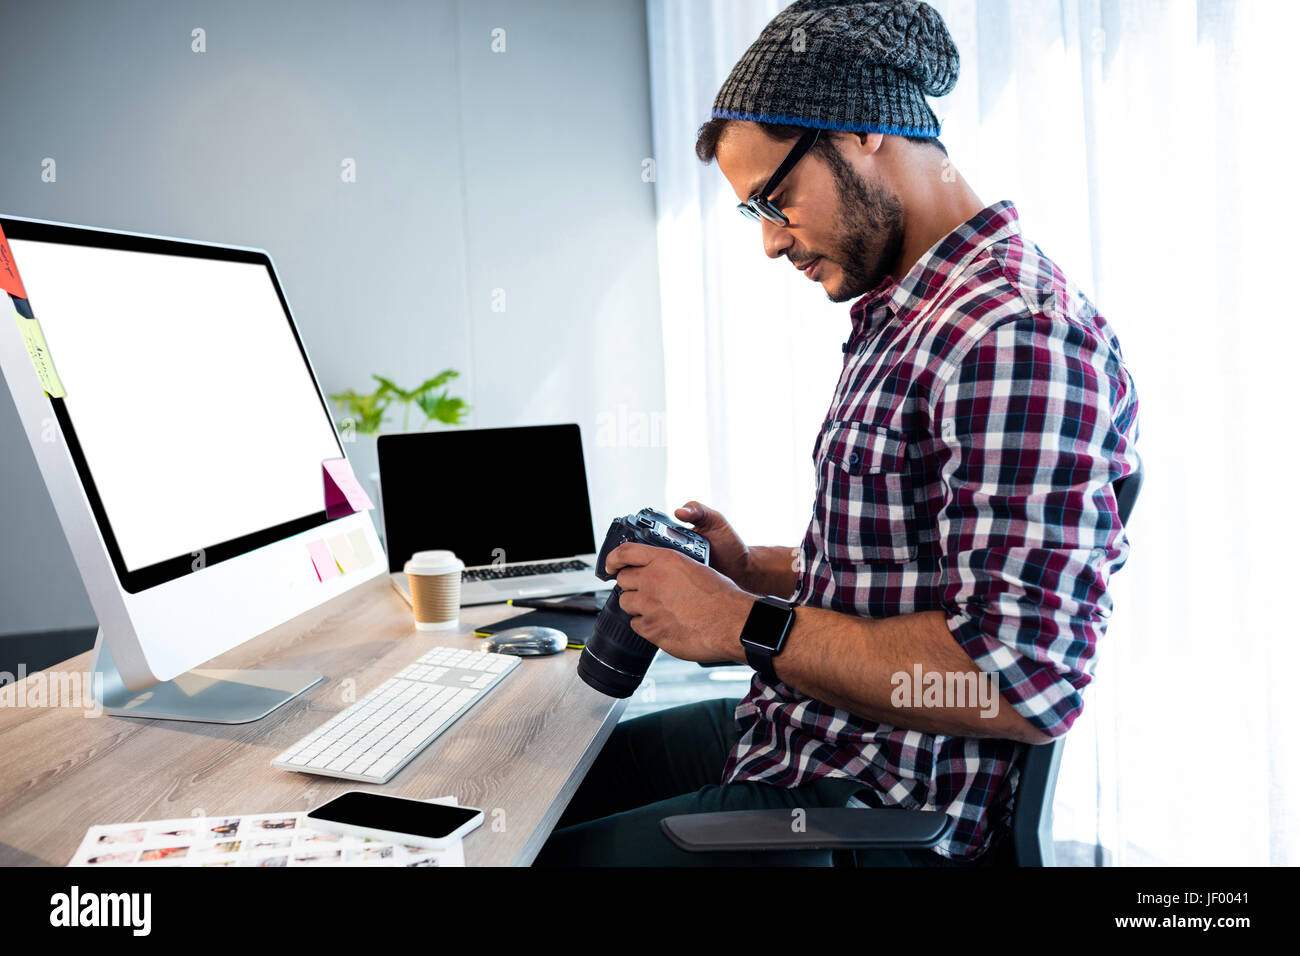 Side view of hipster working at desk Stock Photo